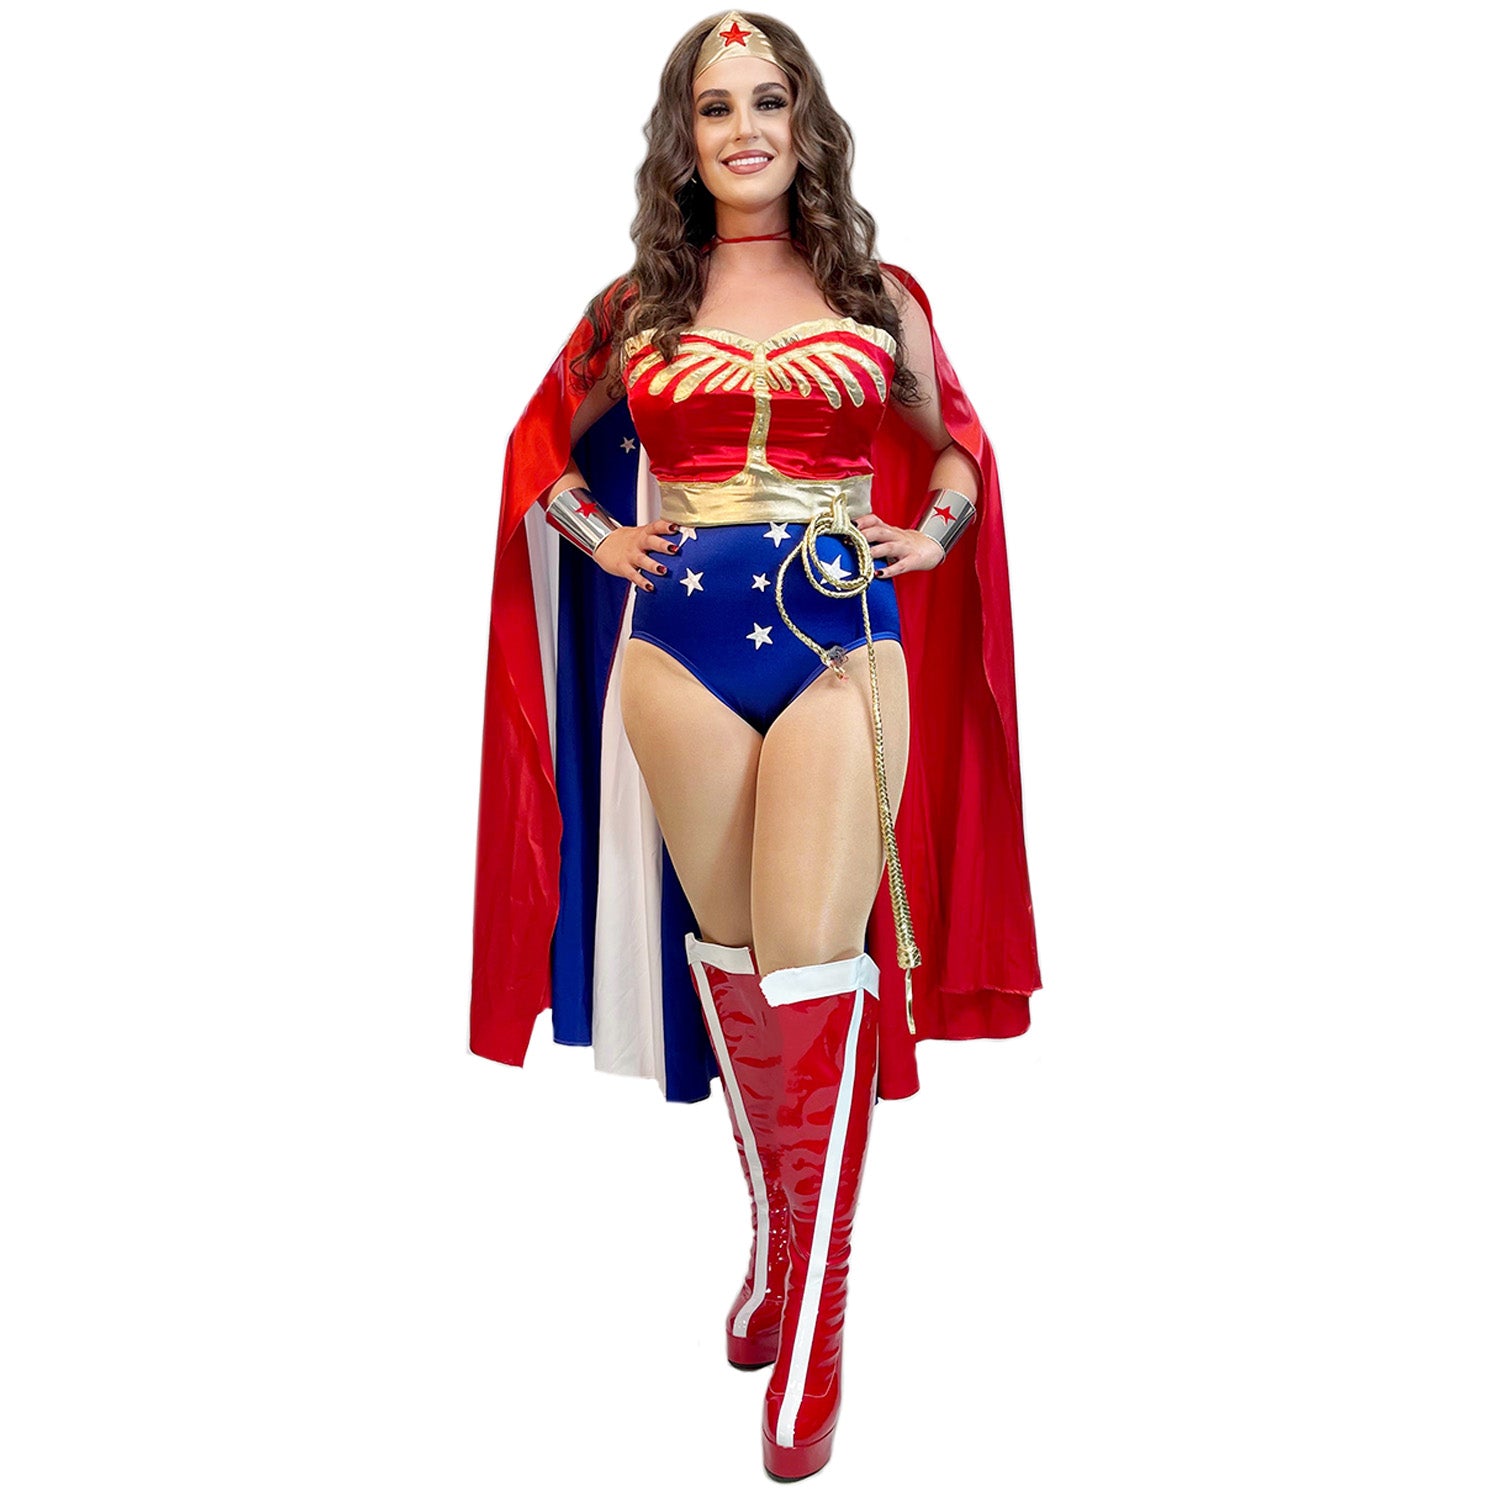 Wonder Woman Inspired Adult Costume w/ Cape, Gold Crown, Lasso, and Cu